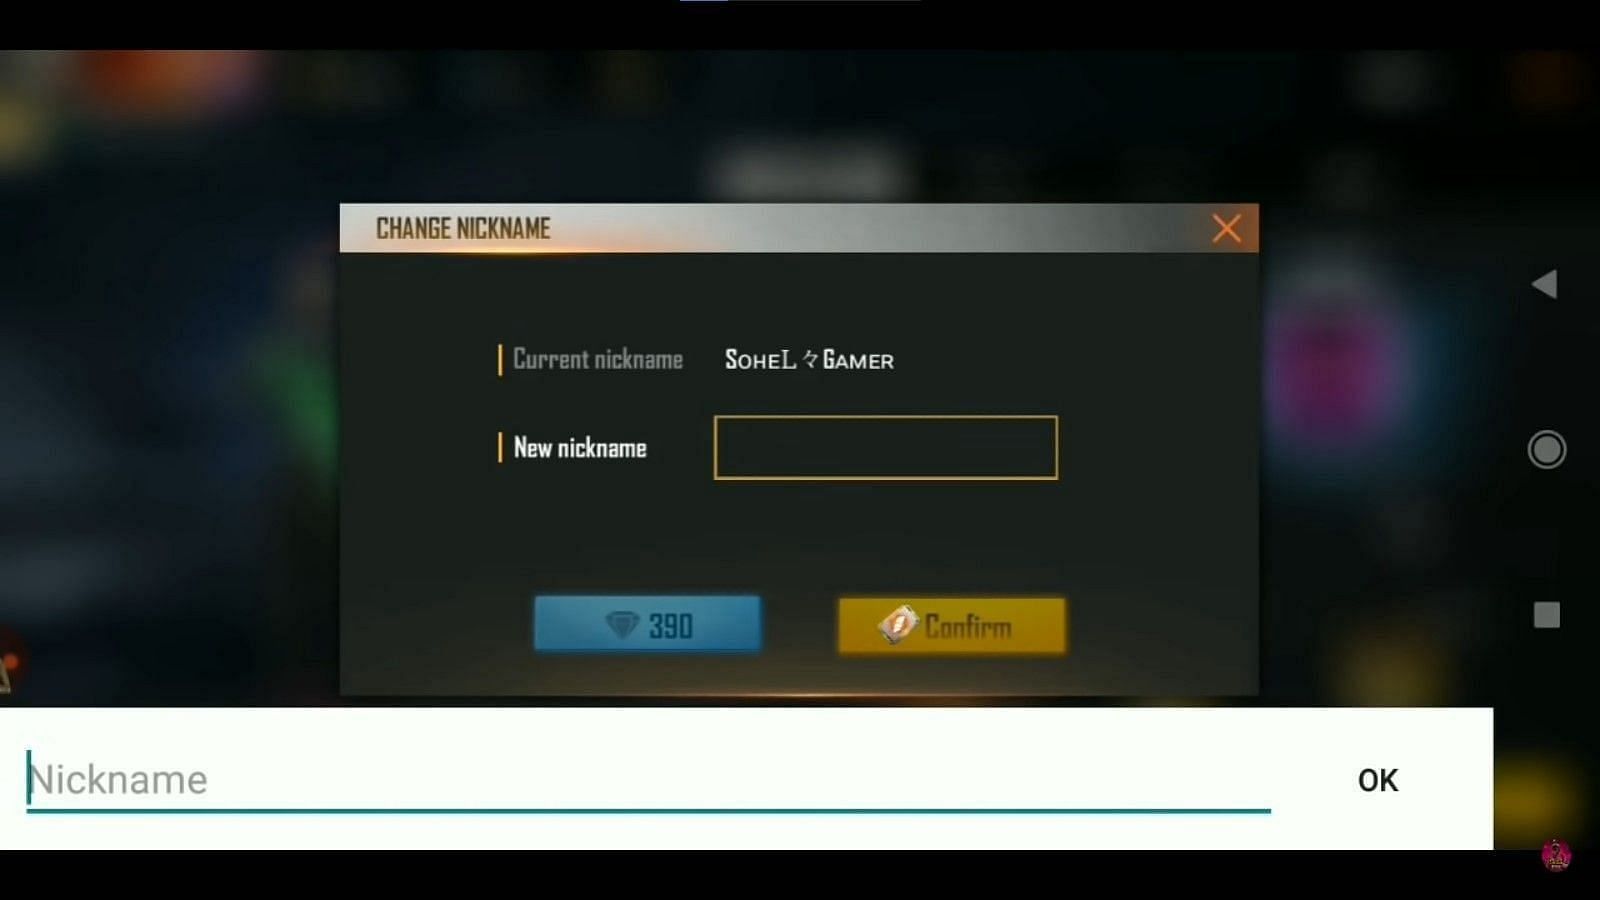 The name change card can be exchanged for 39 diamonds and 200 guild tokens (Image via SOHEL GAMER/YouTube)